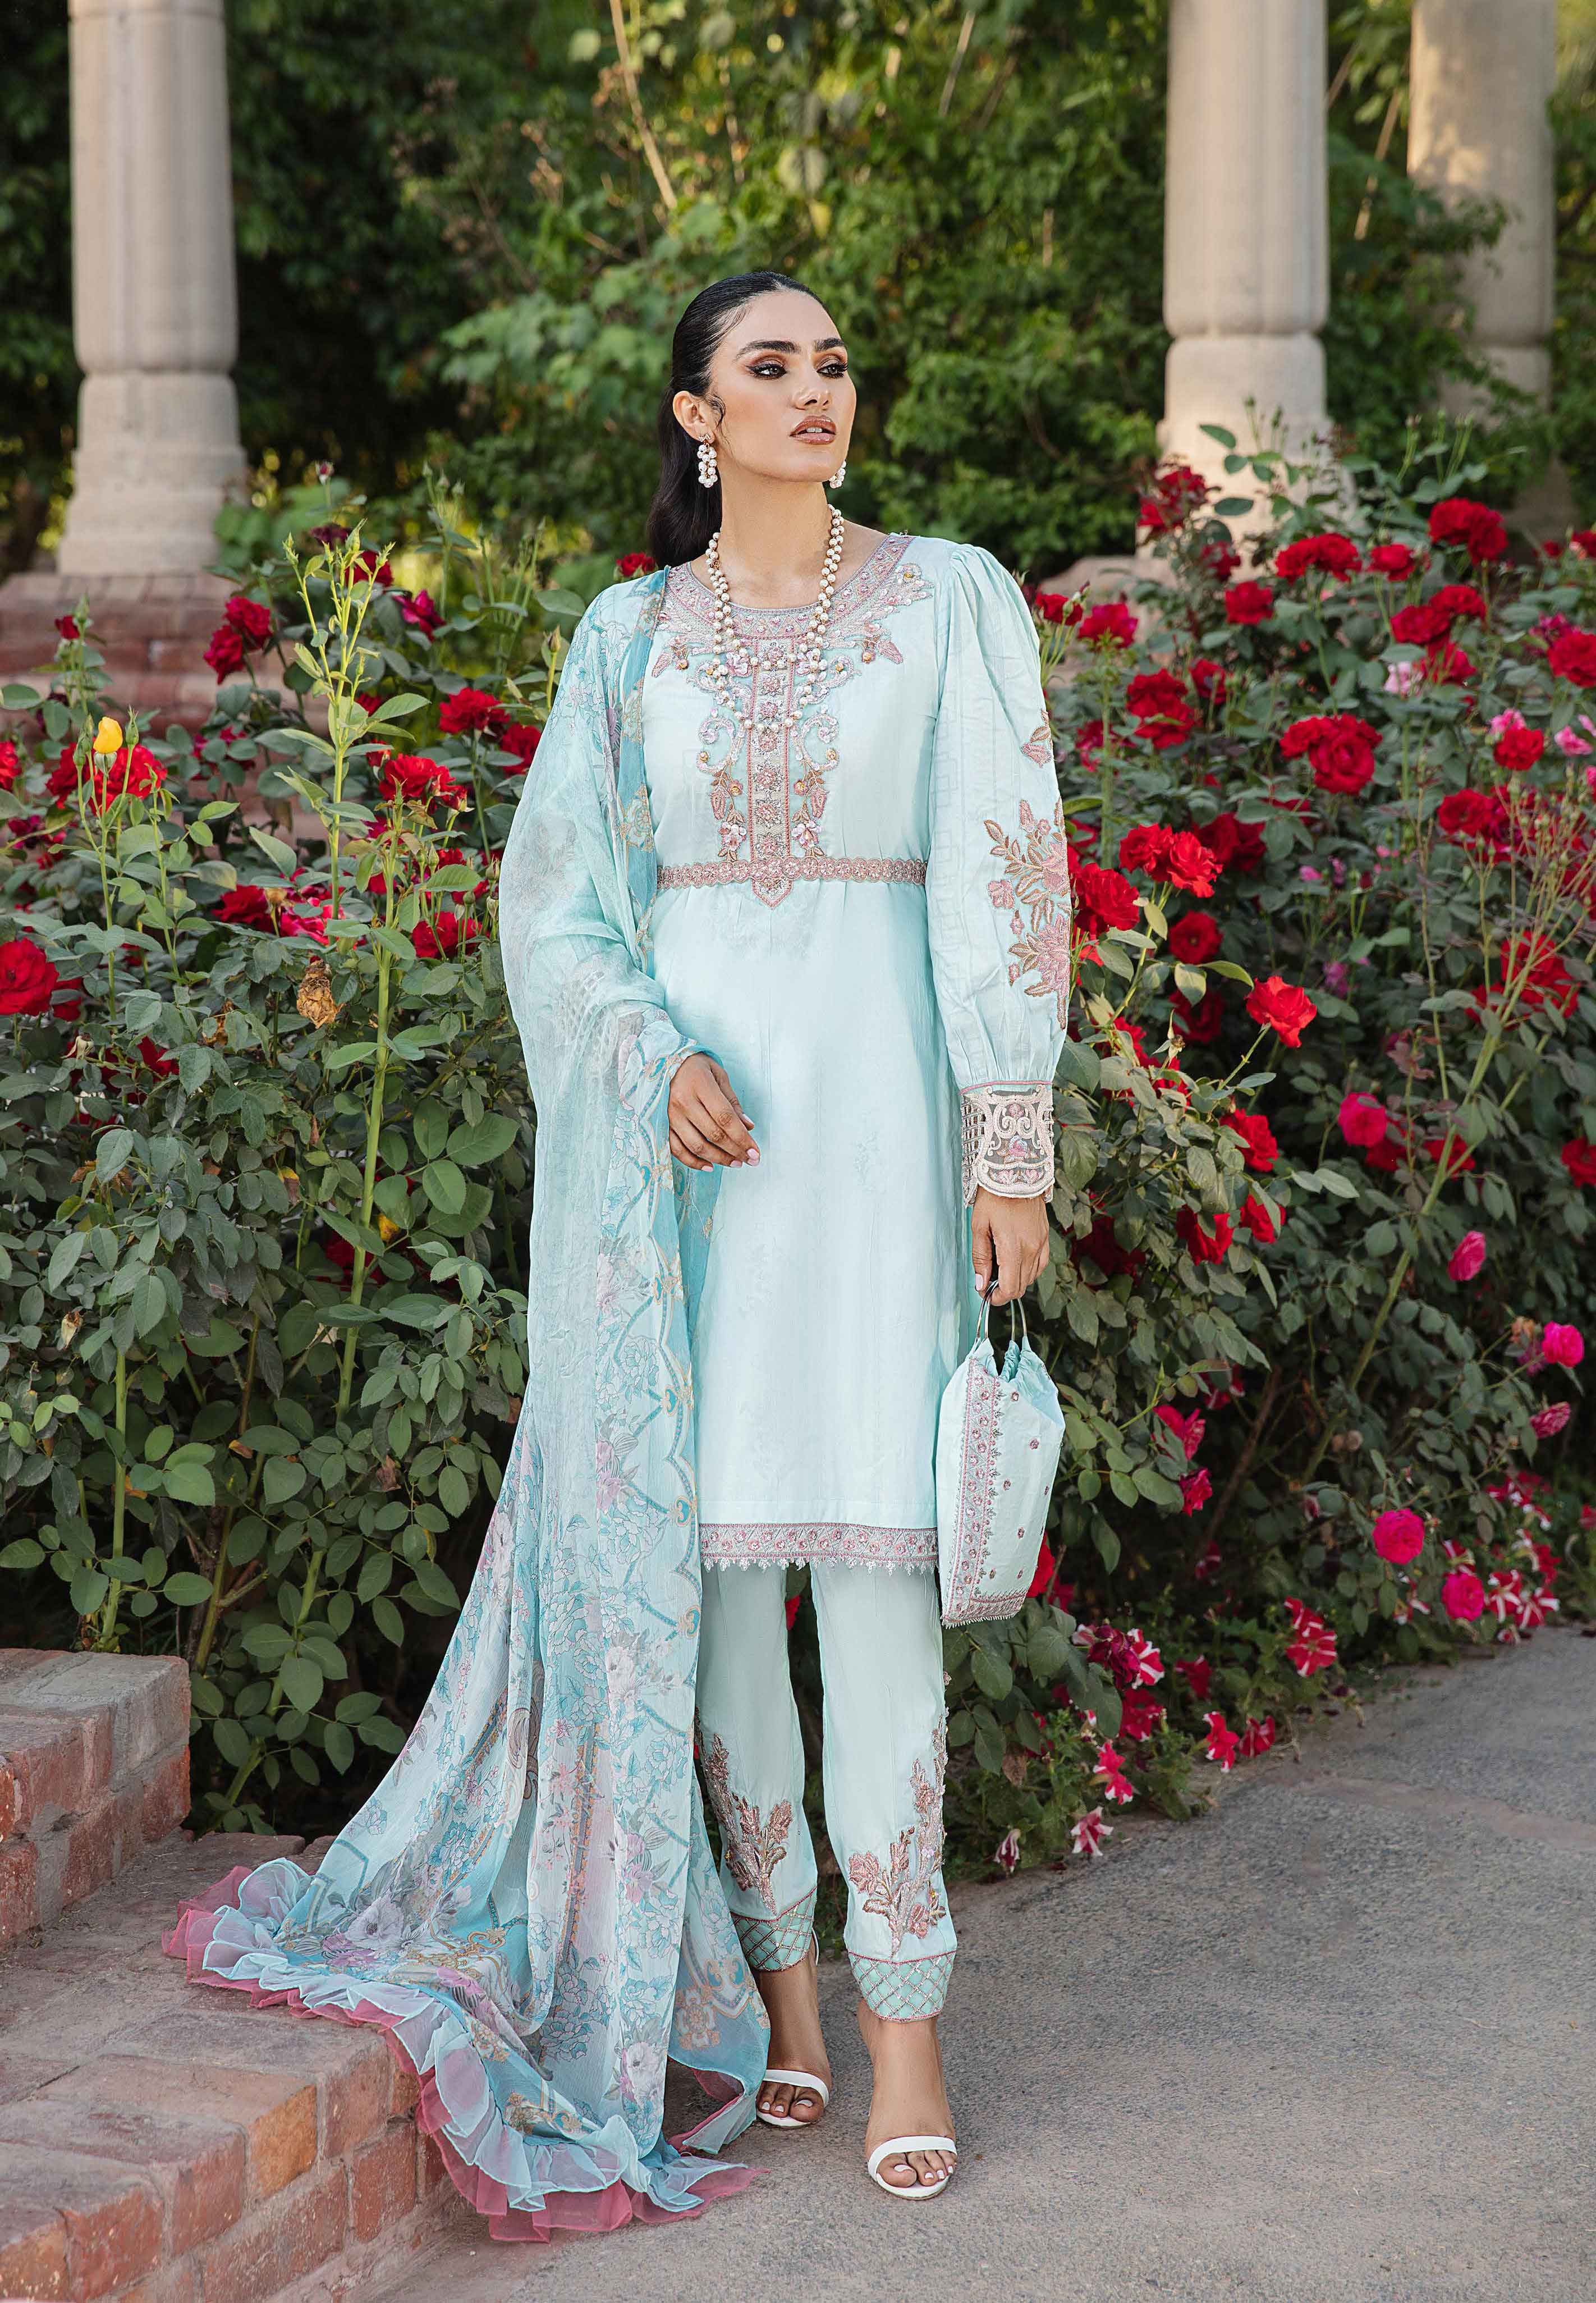 Ivana Mummy & Me Eid Lawn Light Mint Outfit With Clutch Bag